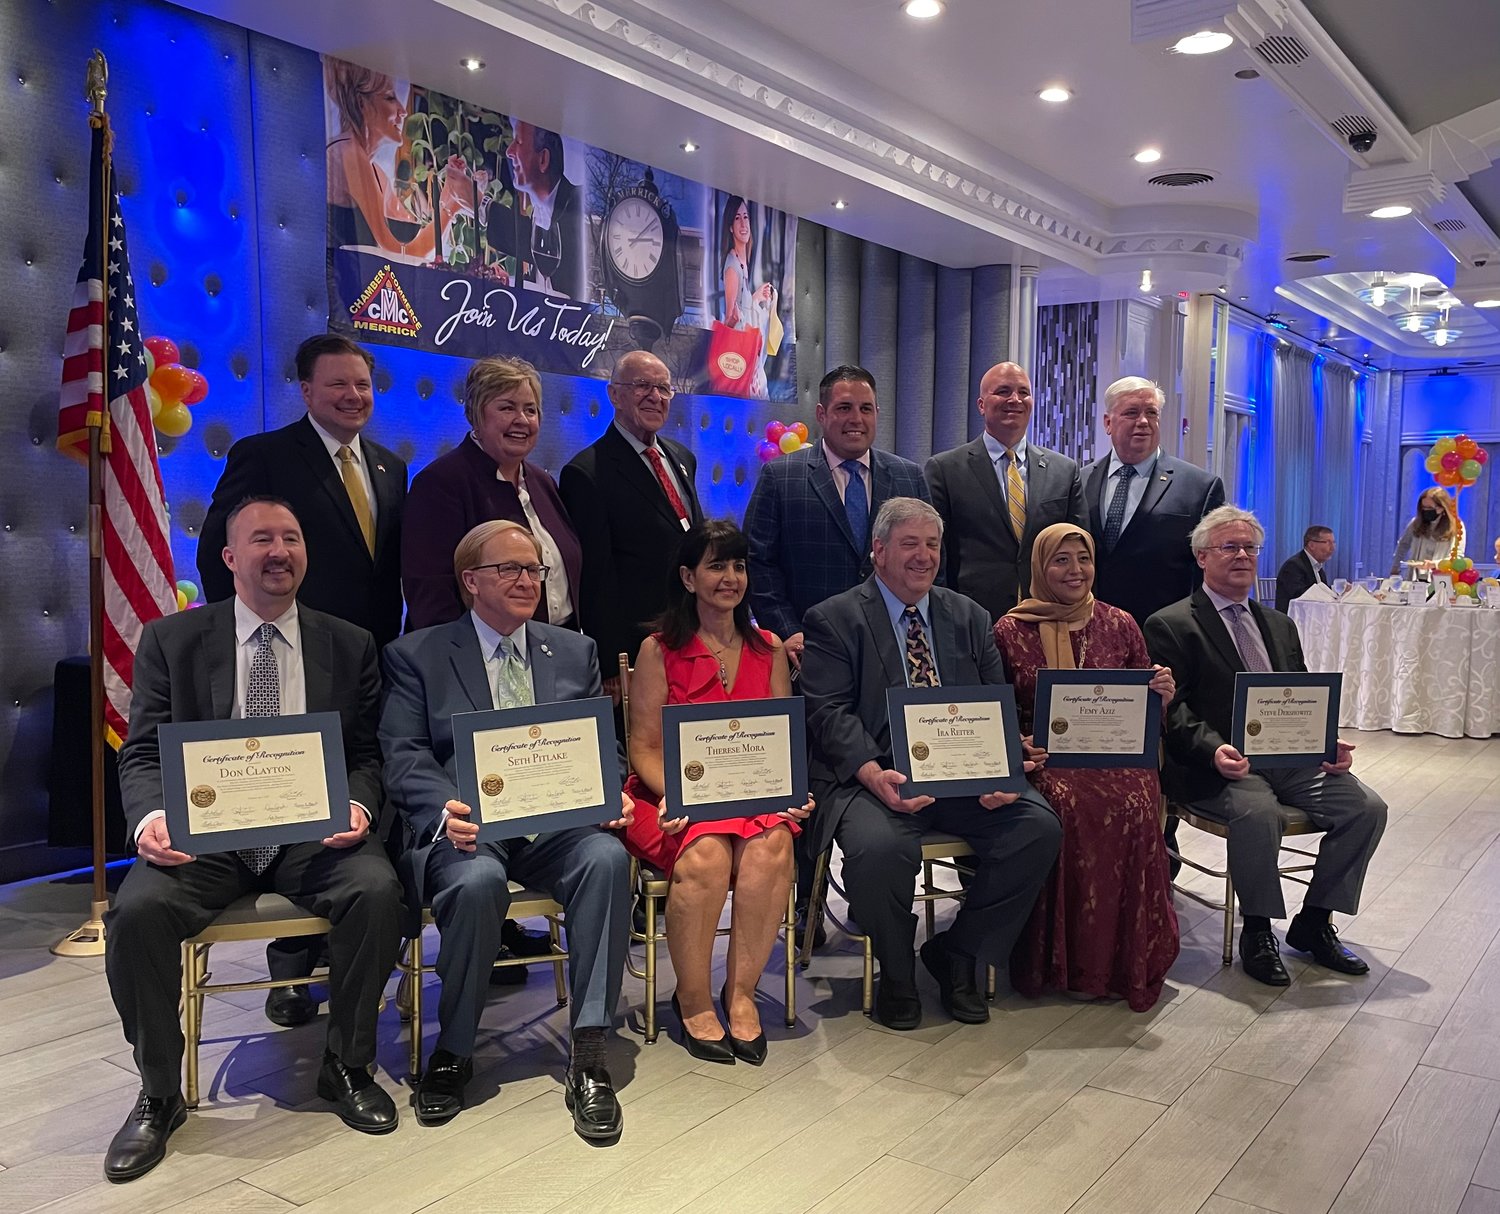 honorees Dan Clayton, Seth Pitlake, Therese Mara, Ira Reiter, Femy Aziz and Steve Dershowitz, in front, with County Legislator Tom McKevitt, Town Clerk Kate Murray, State Assemblyman Dave McDonough, Town Councilmen Anthony Esposito and Chris Carini and Mike Reid, State Sen. John Brooks’s chief of staff, at the installation dinner.